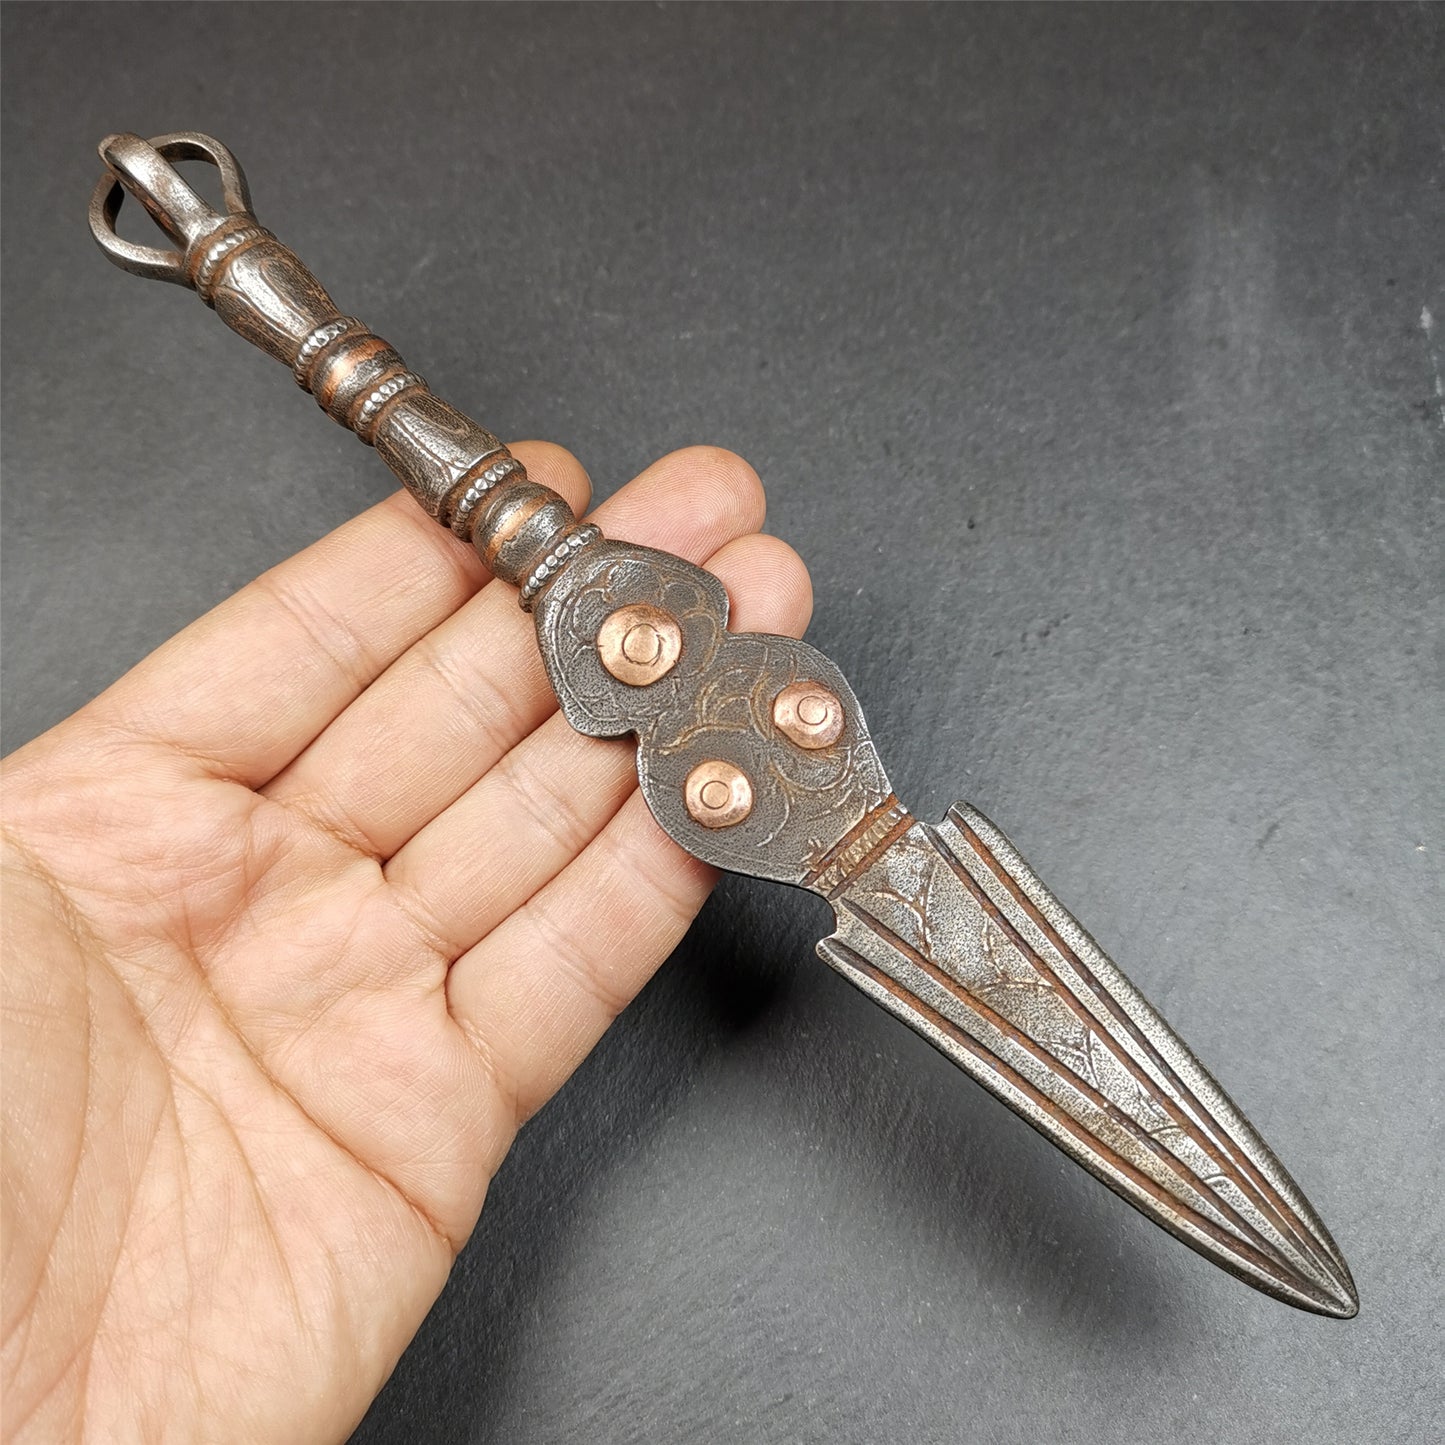 This phurba kila is handmade by Tibetan craftsmen from Tibet in 1990s.  It's a kila dagger, phurba,made of cold iron, carved cloud pattern, inlaid red copper, and the half vajra on the handle,8.7 inches length.